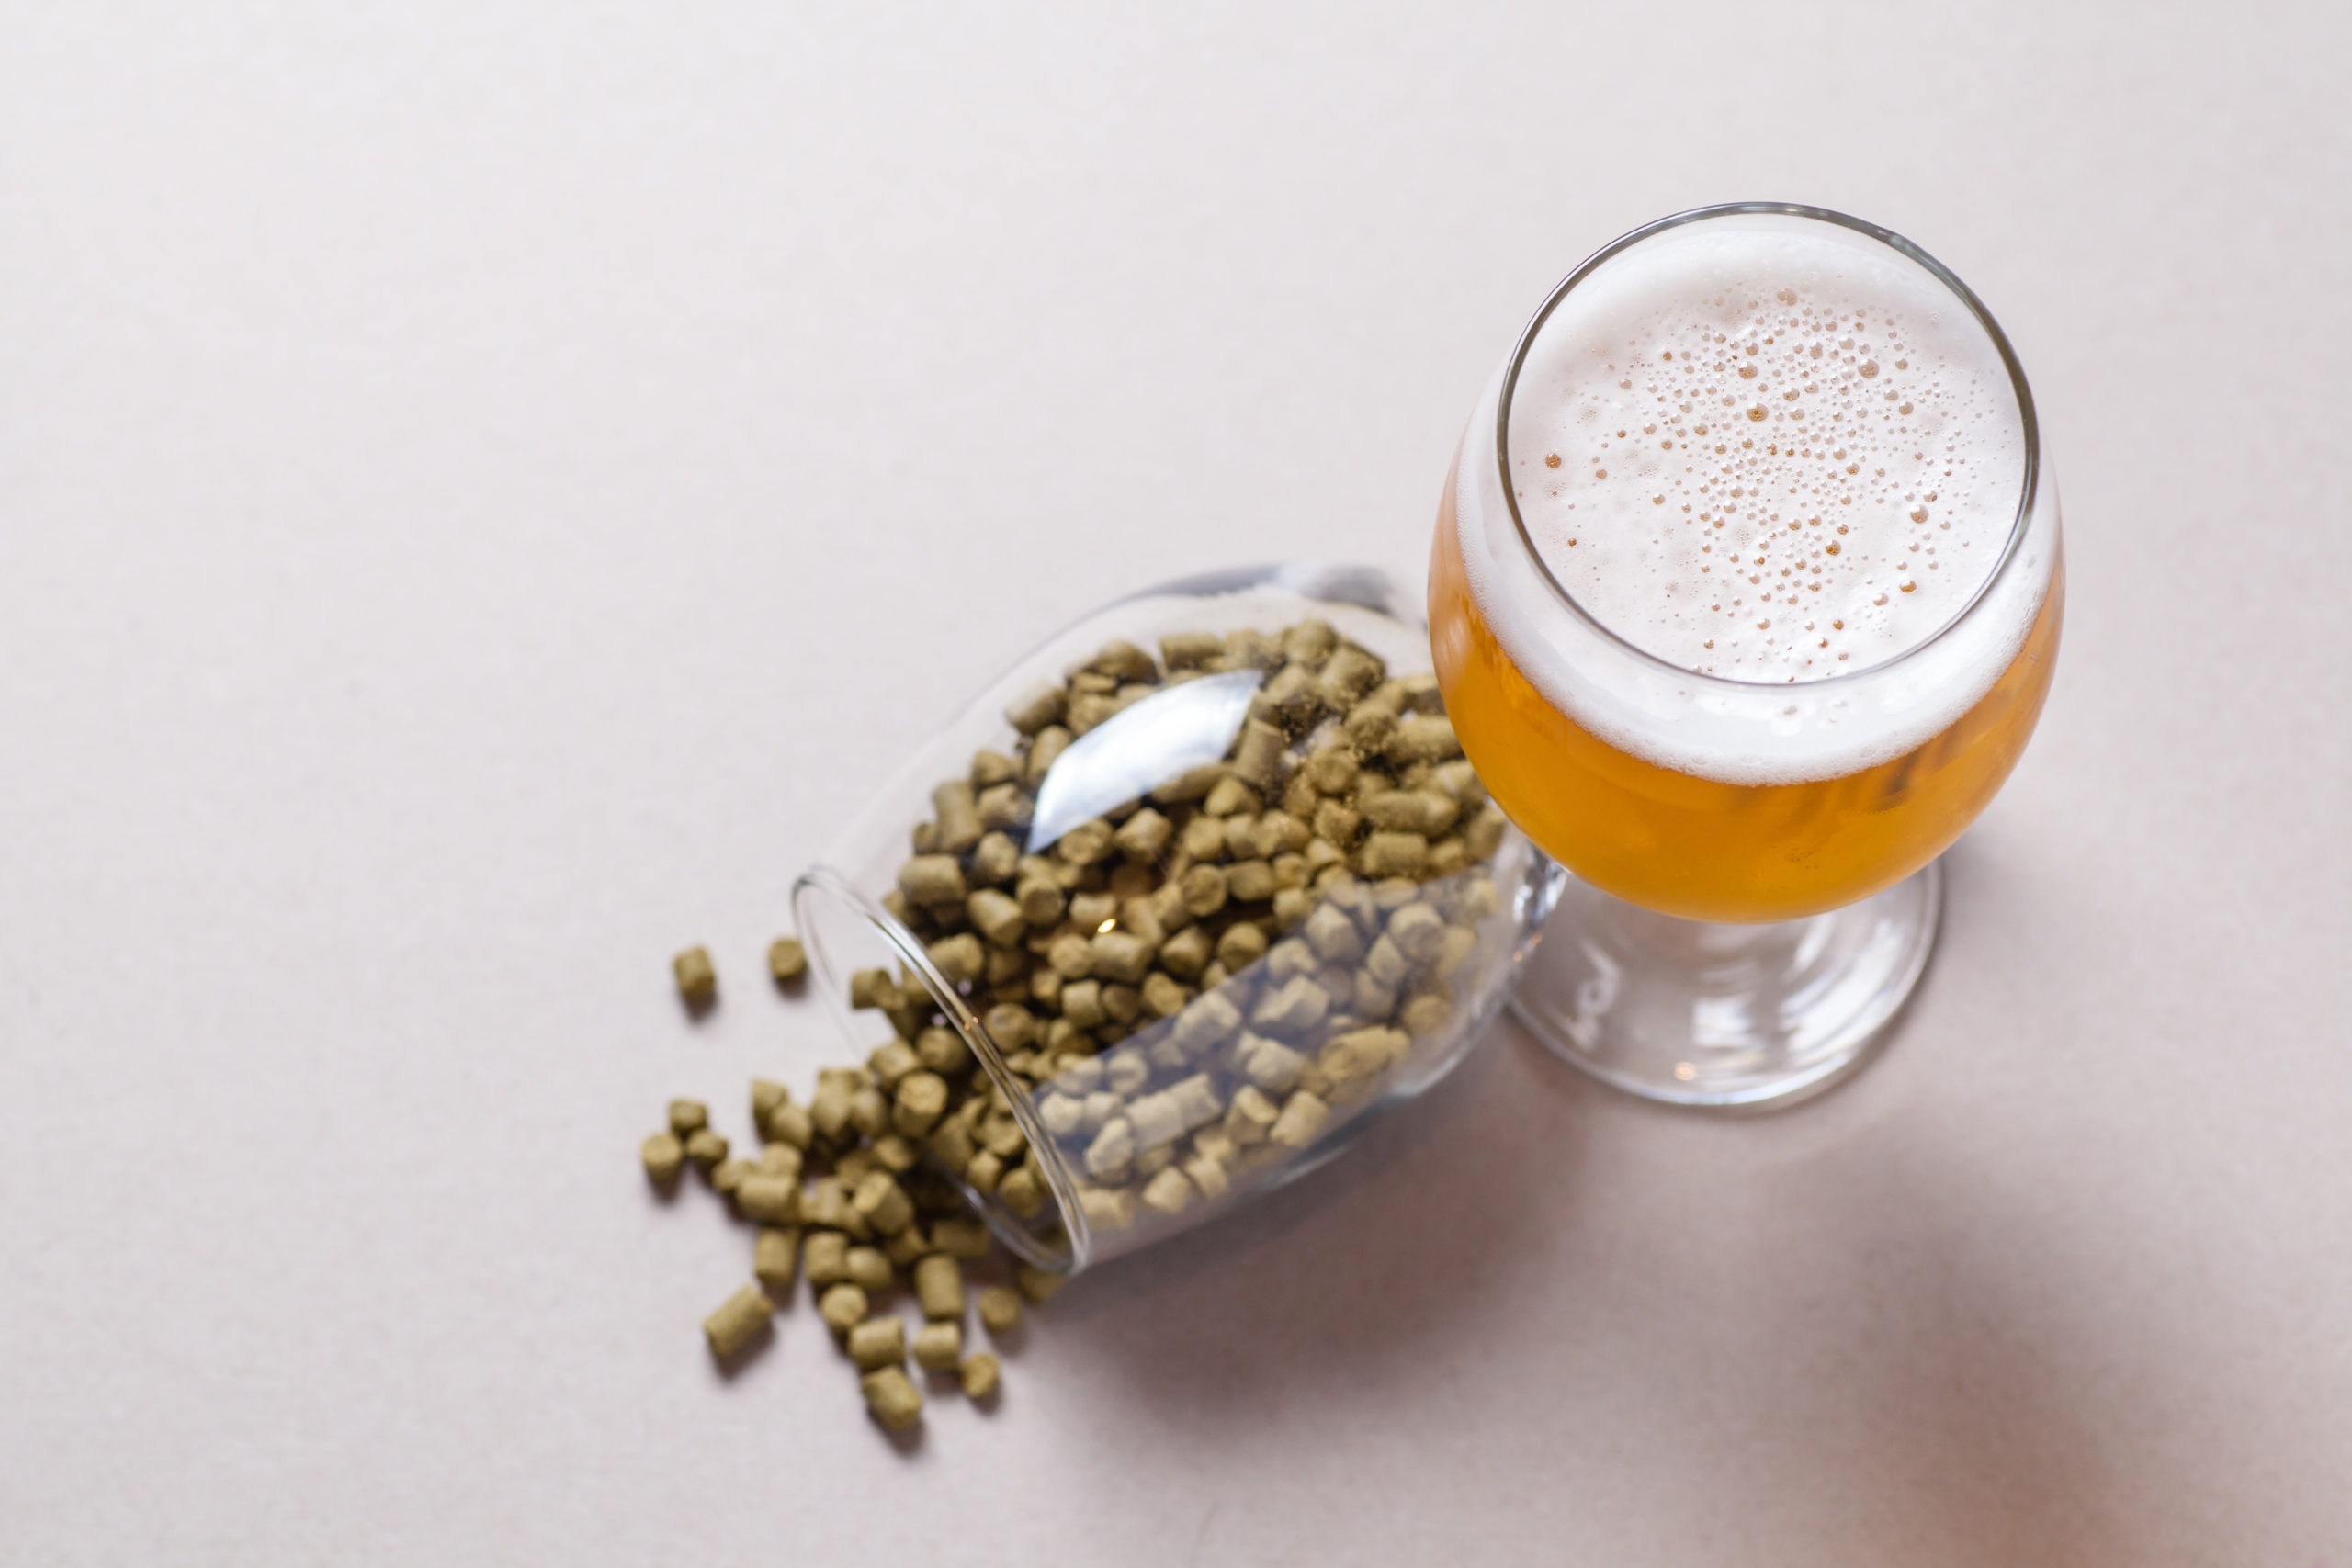 glass of pale ale with spilled glass of hop pellets